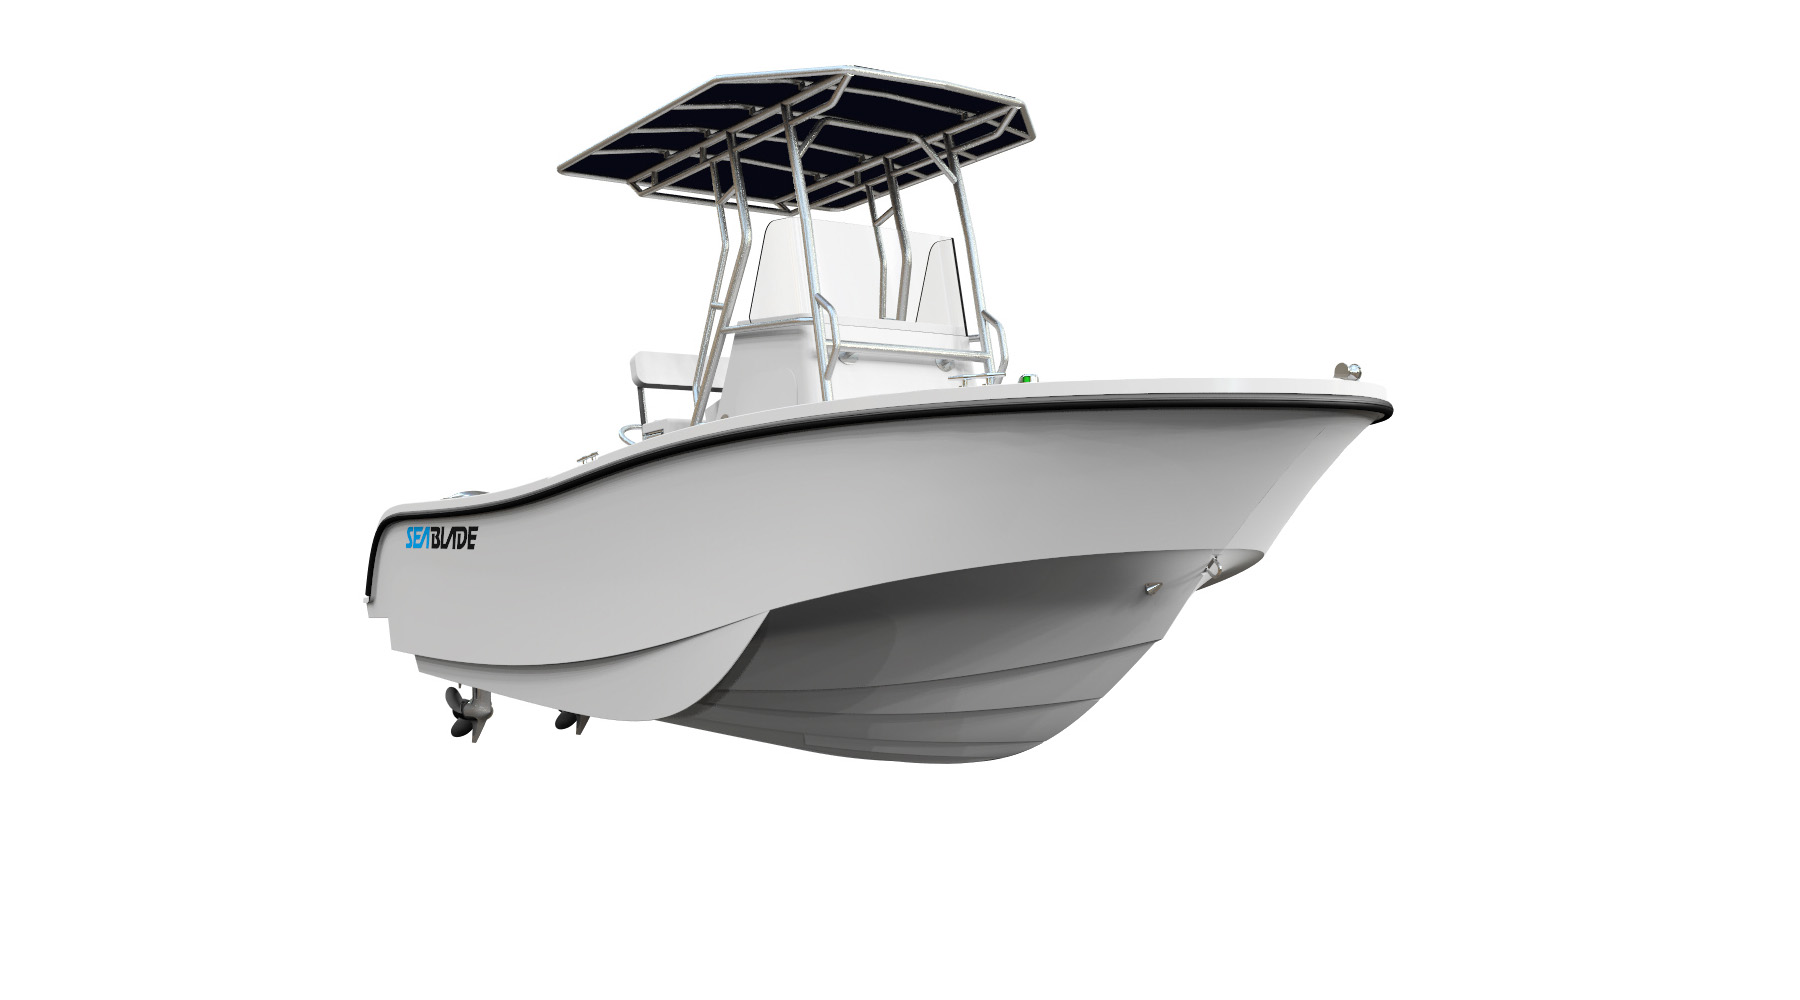 Sea Blade Boats Boat Builder and Marine Fabrication in